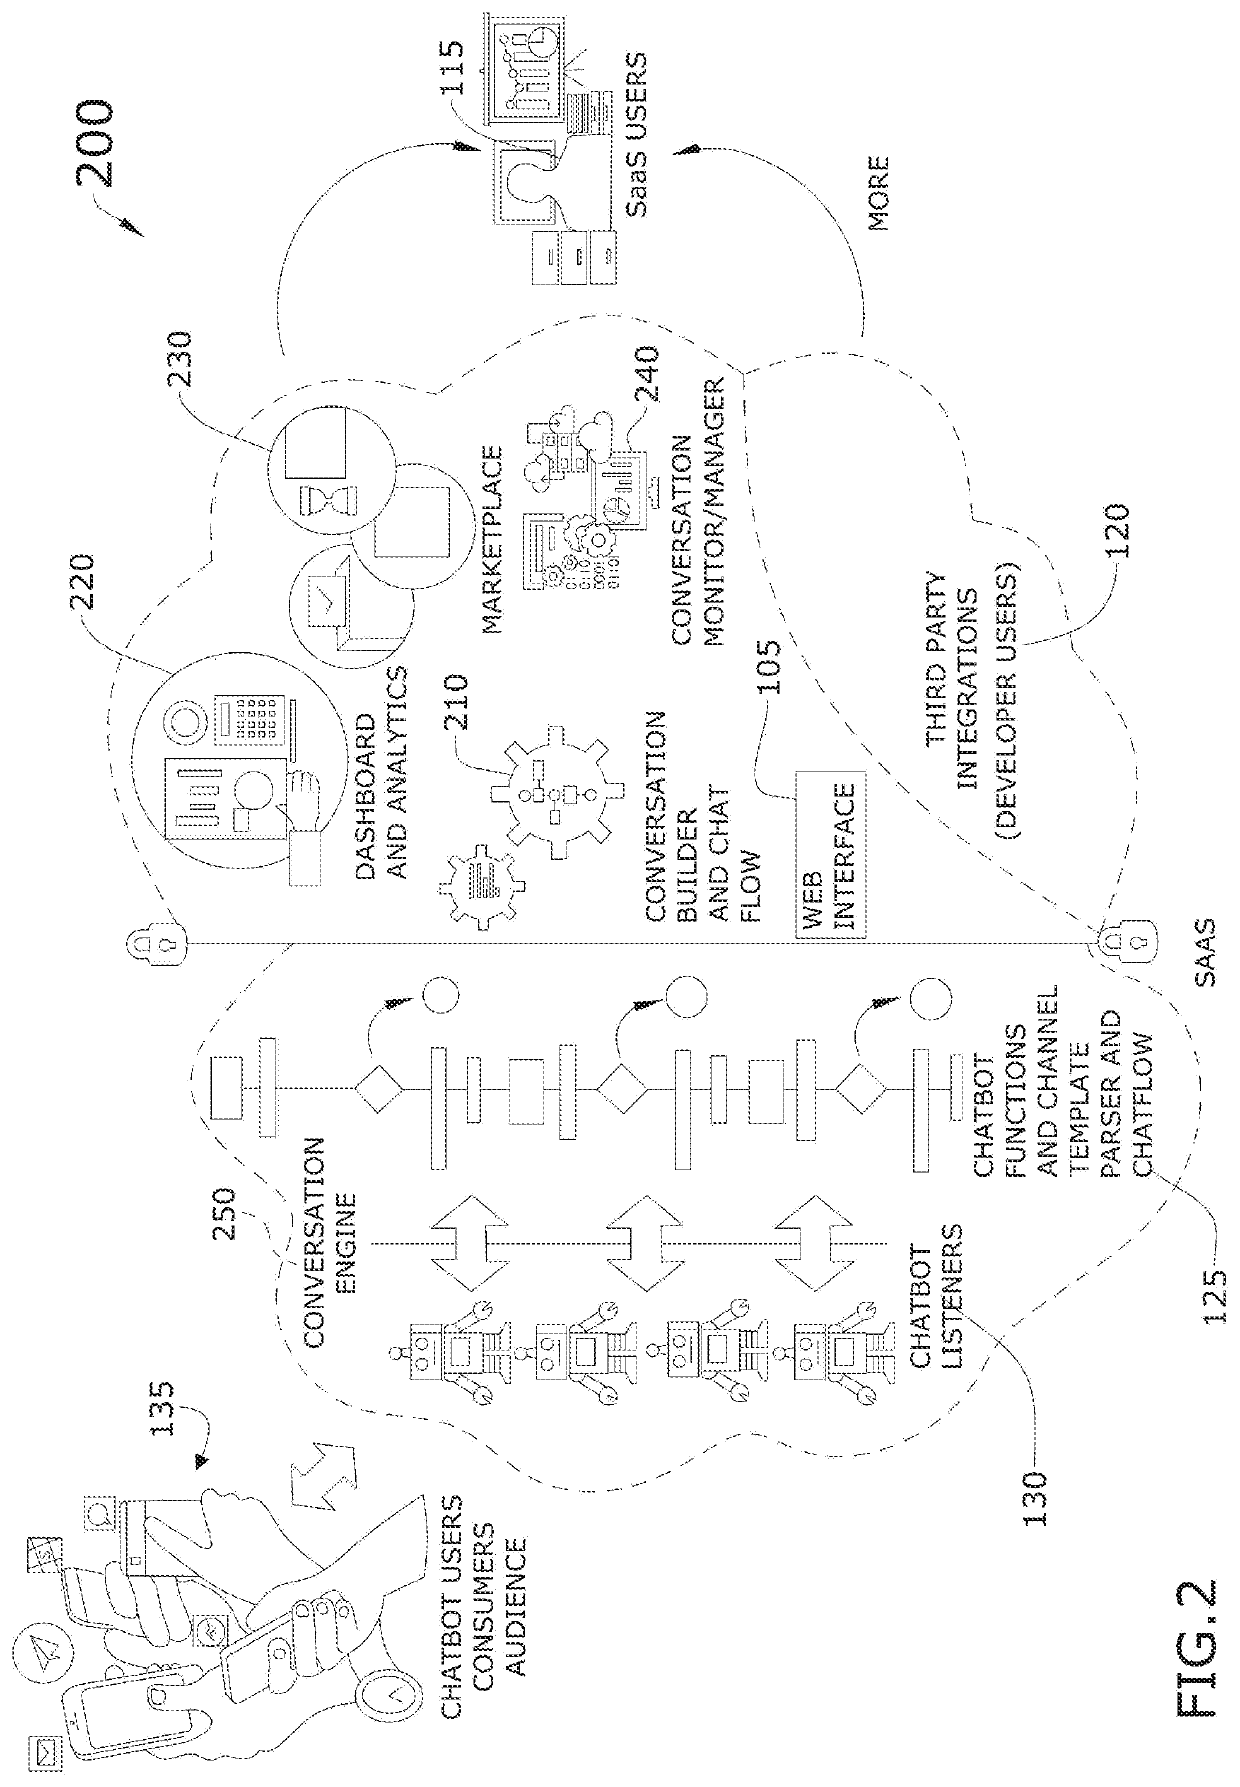 Conversational and live interactions development and marketplace distribution system and process